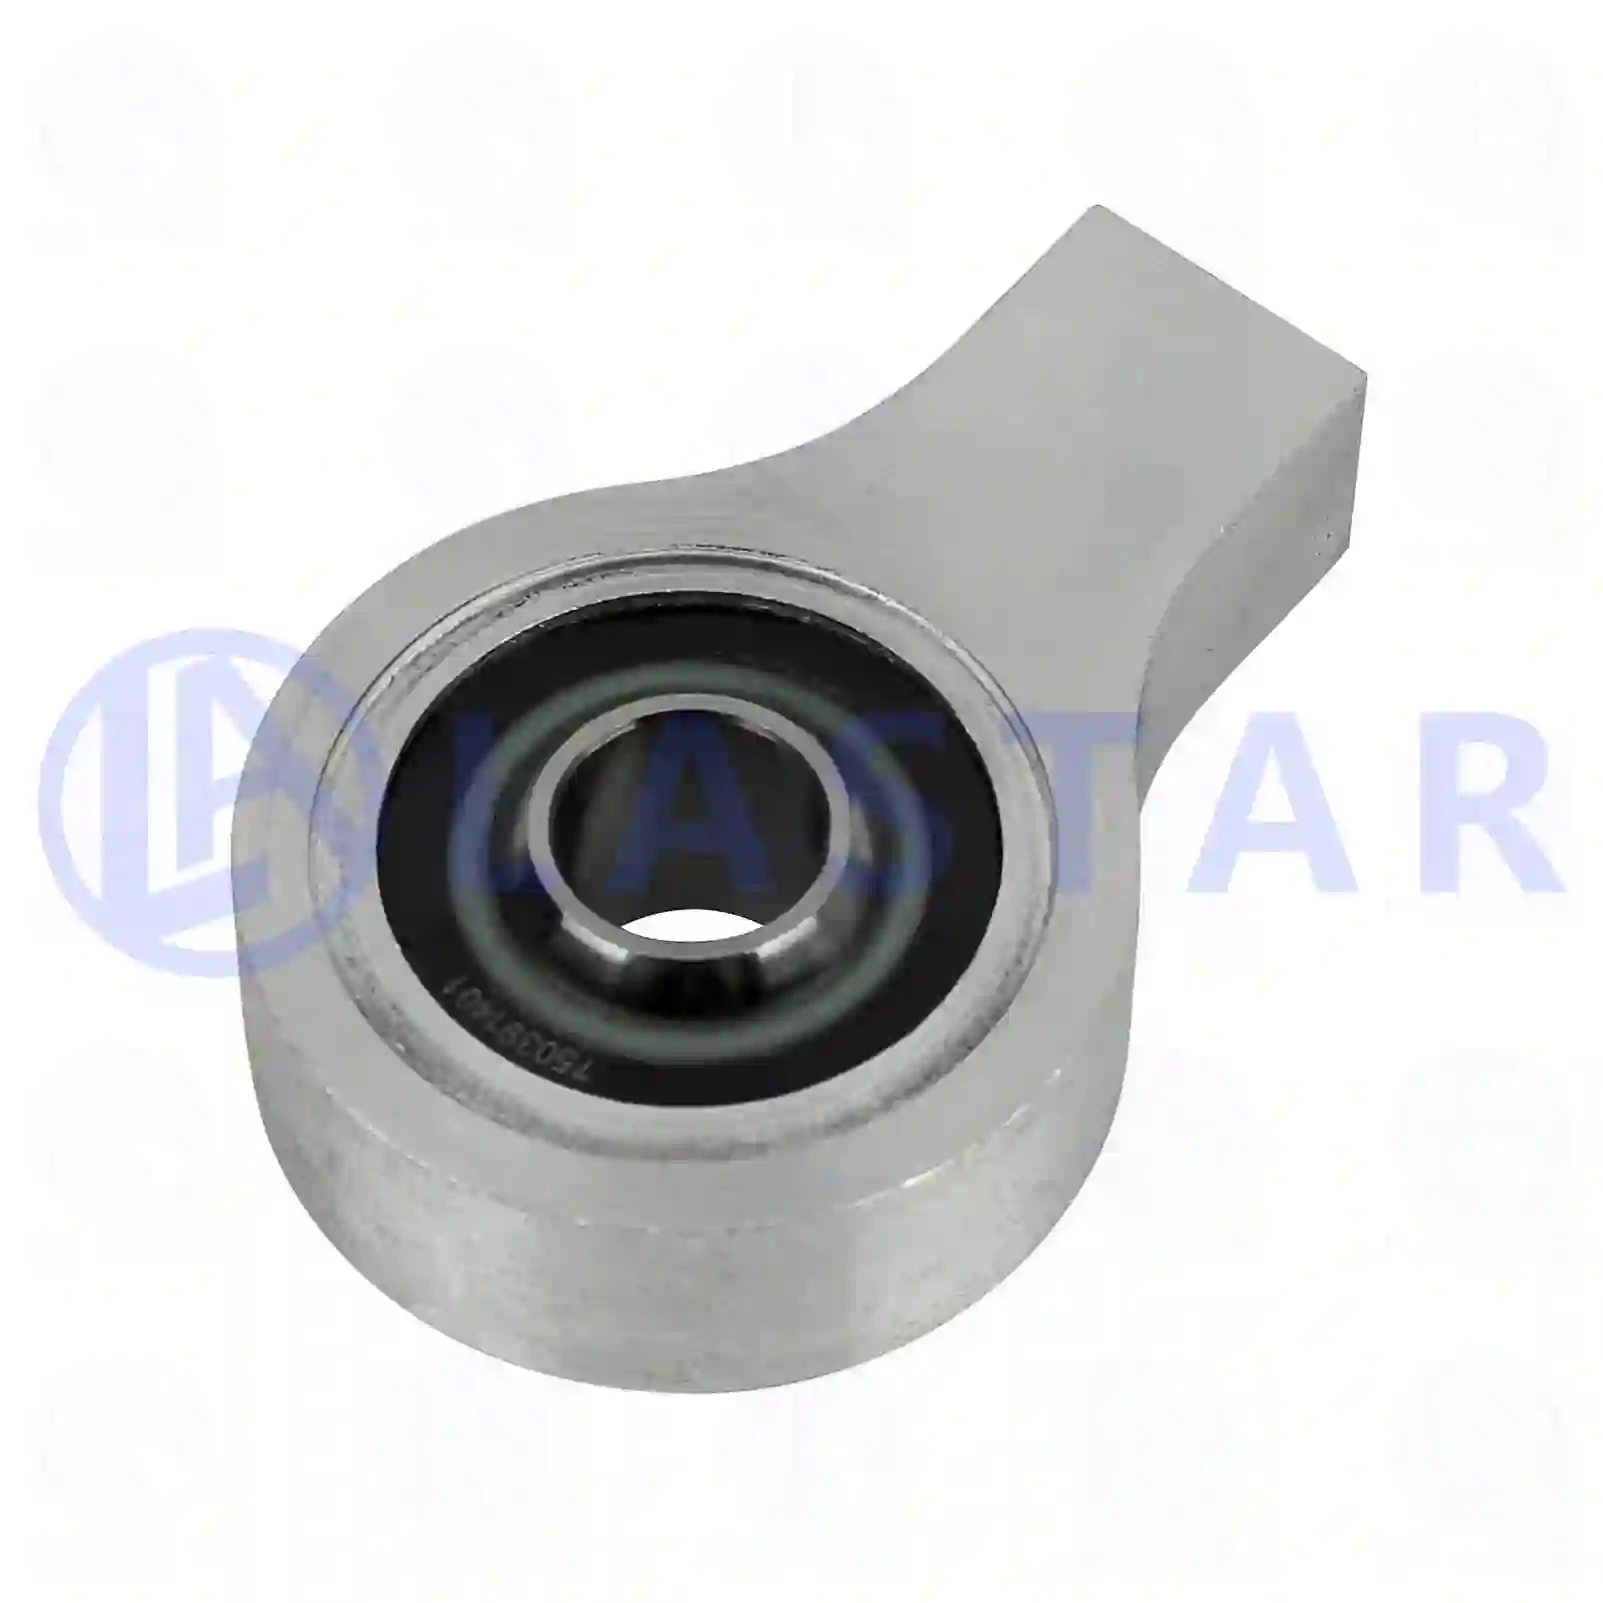 Bearing joint, cabin shock absorber, 77735332, 1364293, 1443114, 1504160, 1744210, 504160, ZG40851-0008 ||  77735332 Lastar Spare Part | Truck Spare Parts, Auotomotive Spare Parts Bearing joint, cabin shock absorber, 77735332, 1364293, 1443114, 1504160, 1744210, 504160, ZG40851-0008 ||  77735332 Lastar Spare Part | Truck Spare Parts, Auotomotive Spare Parts